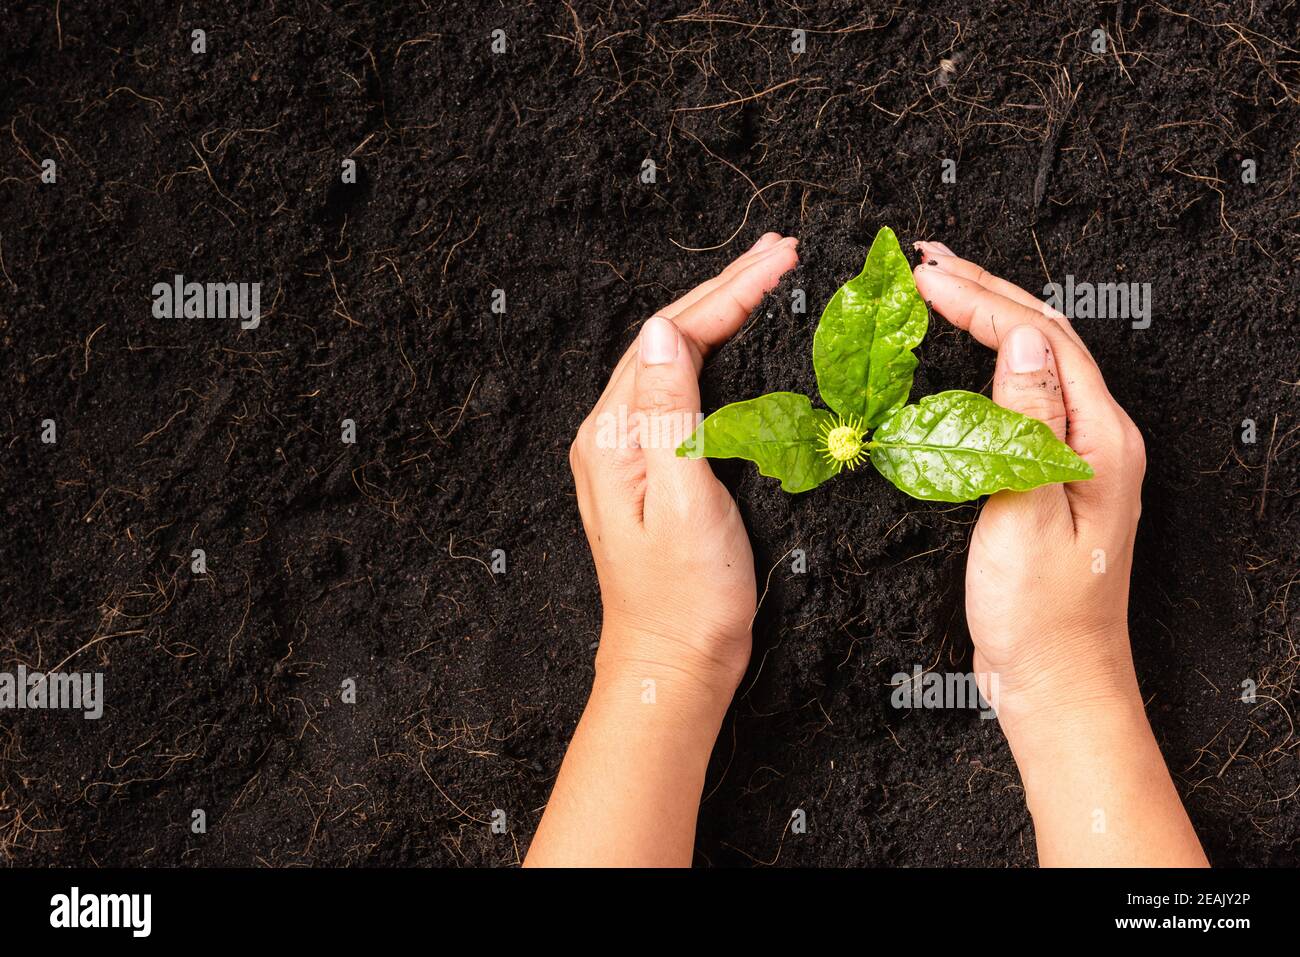 Hand of a woman planting green small plant life on compost fertile black soil Stock Photo